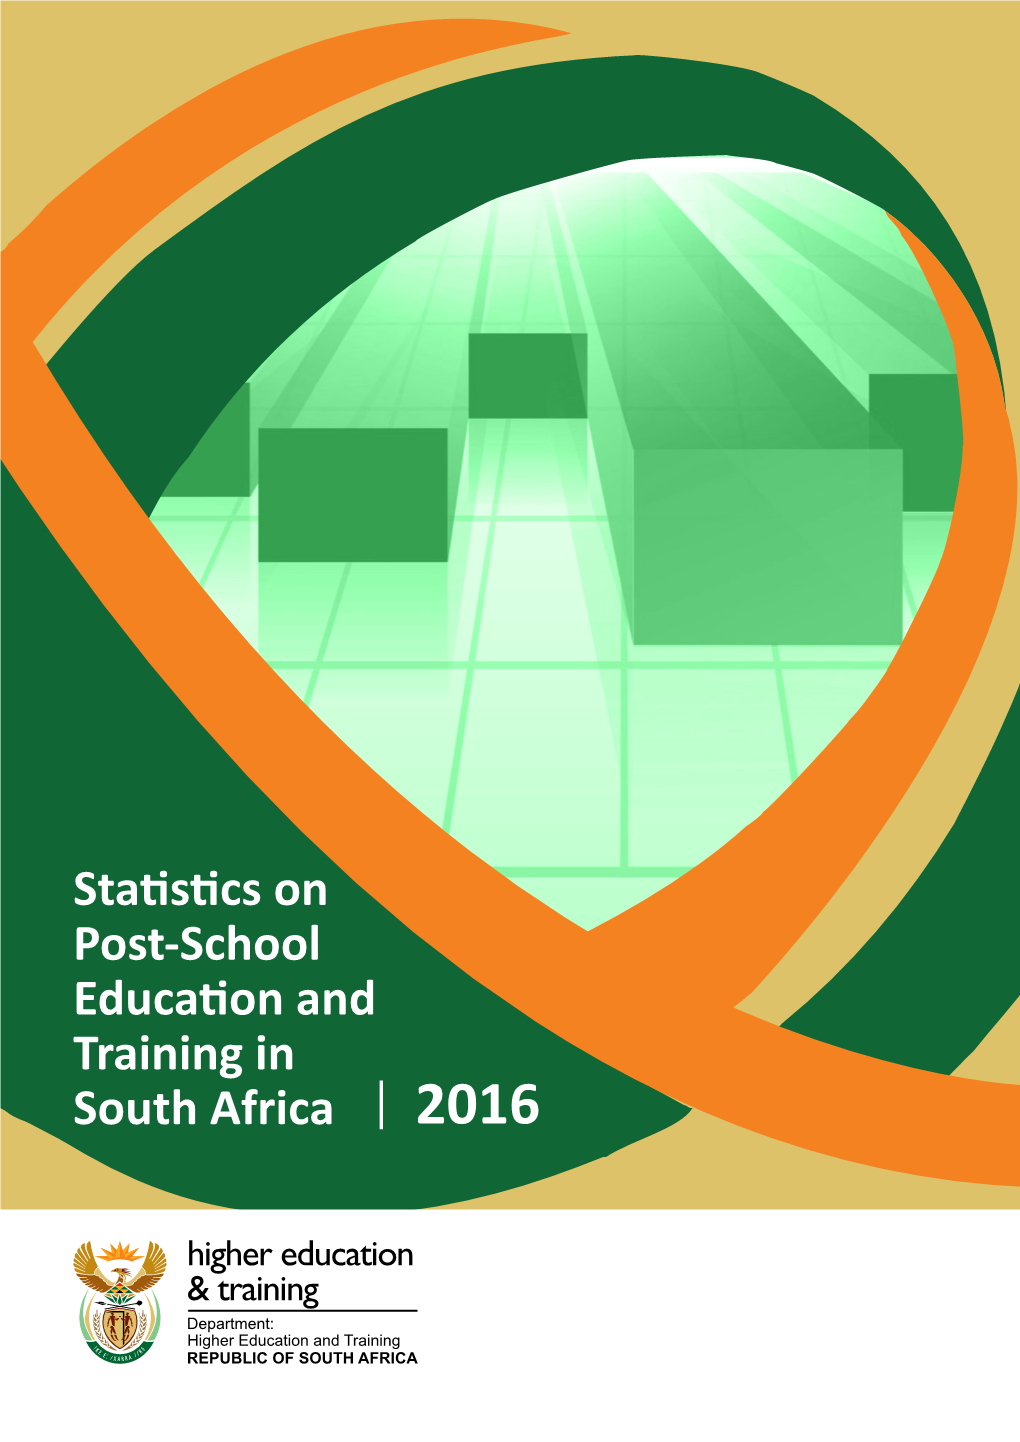 Statistics on Post-School Education and Training in South Africa: 2016